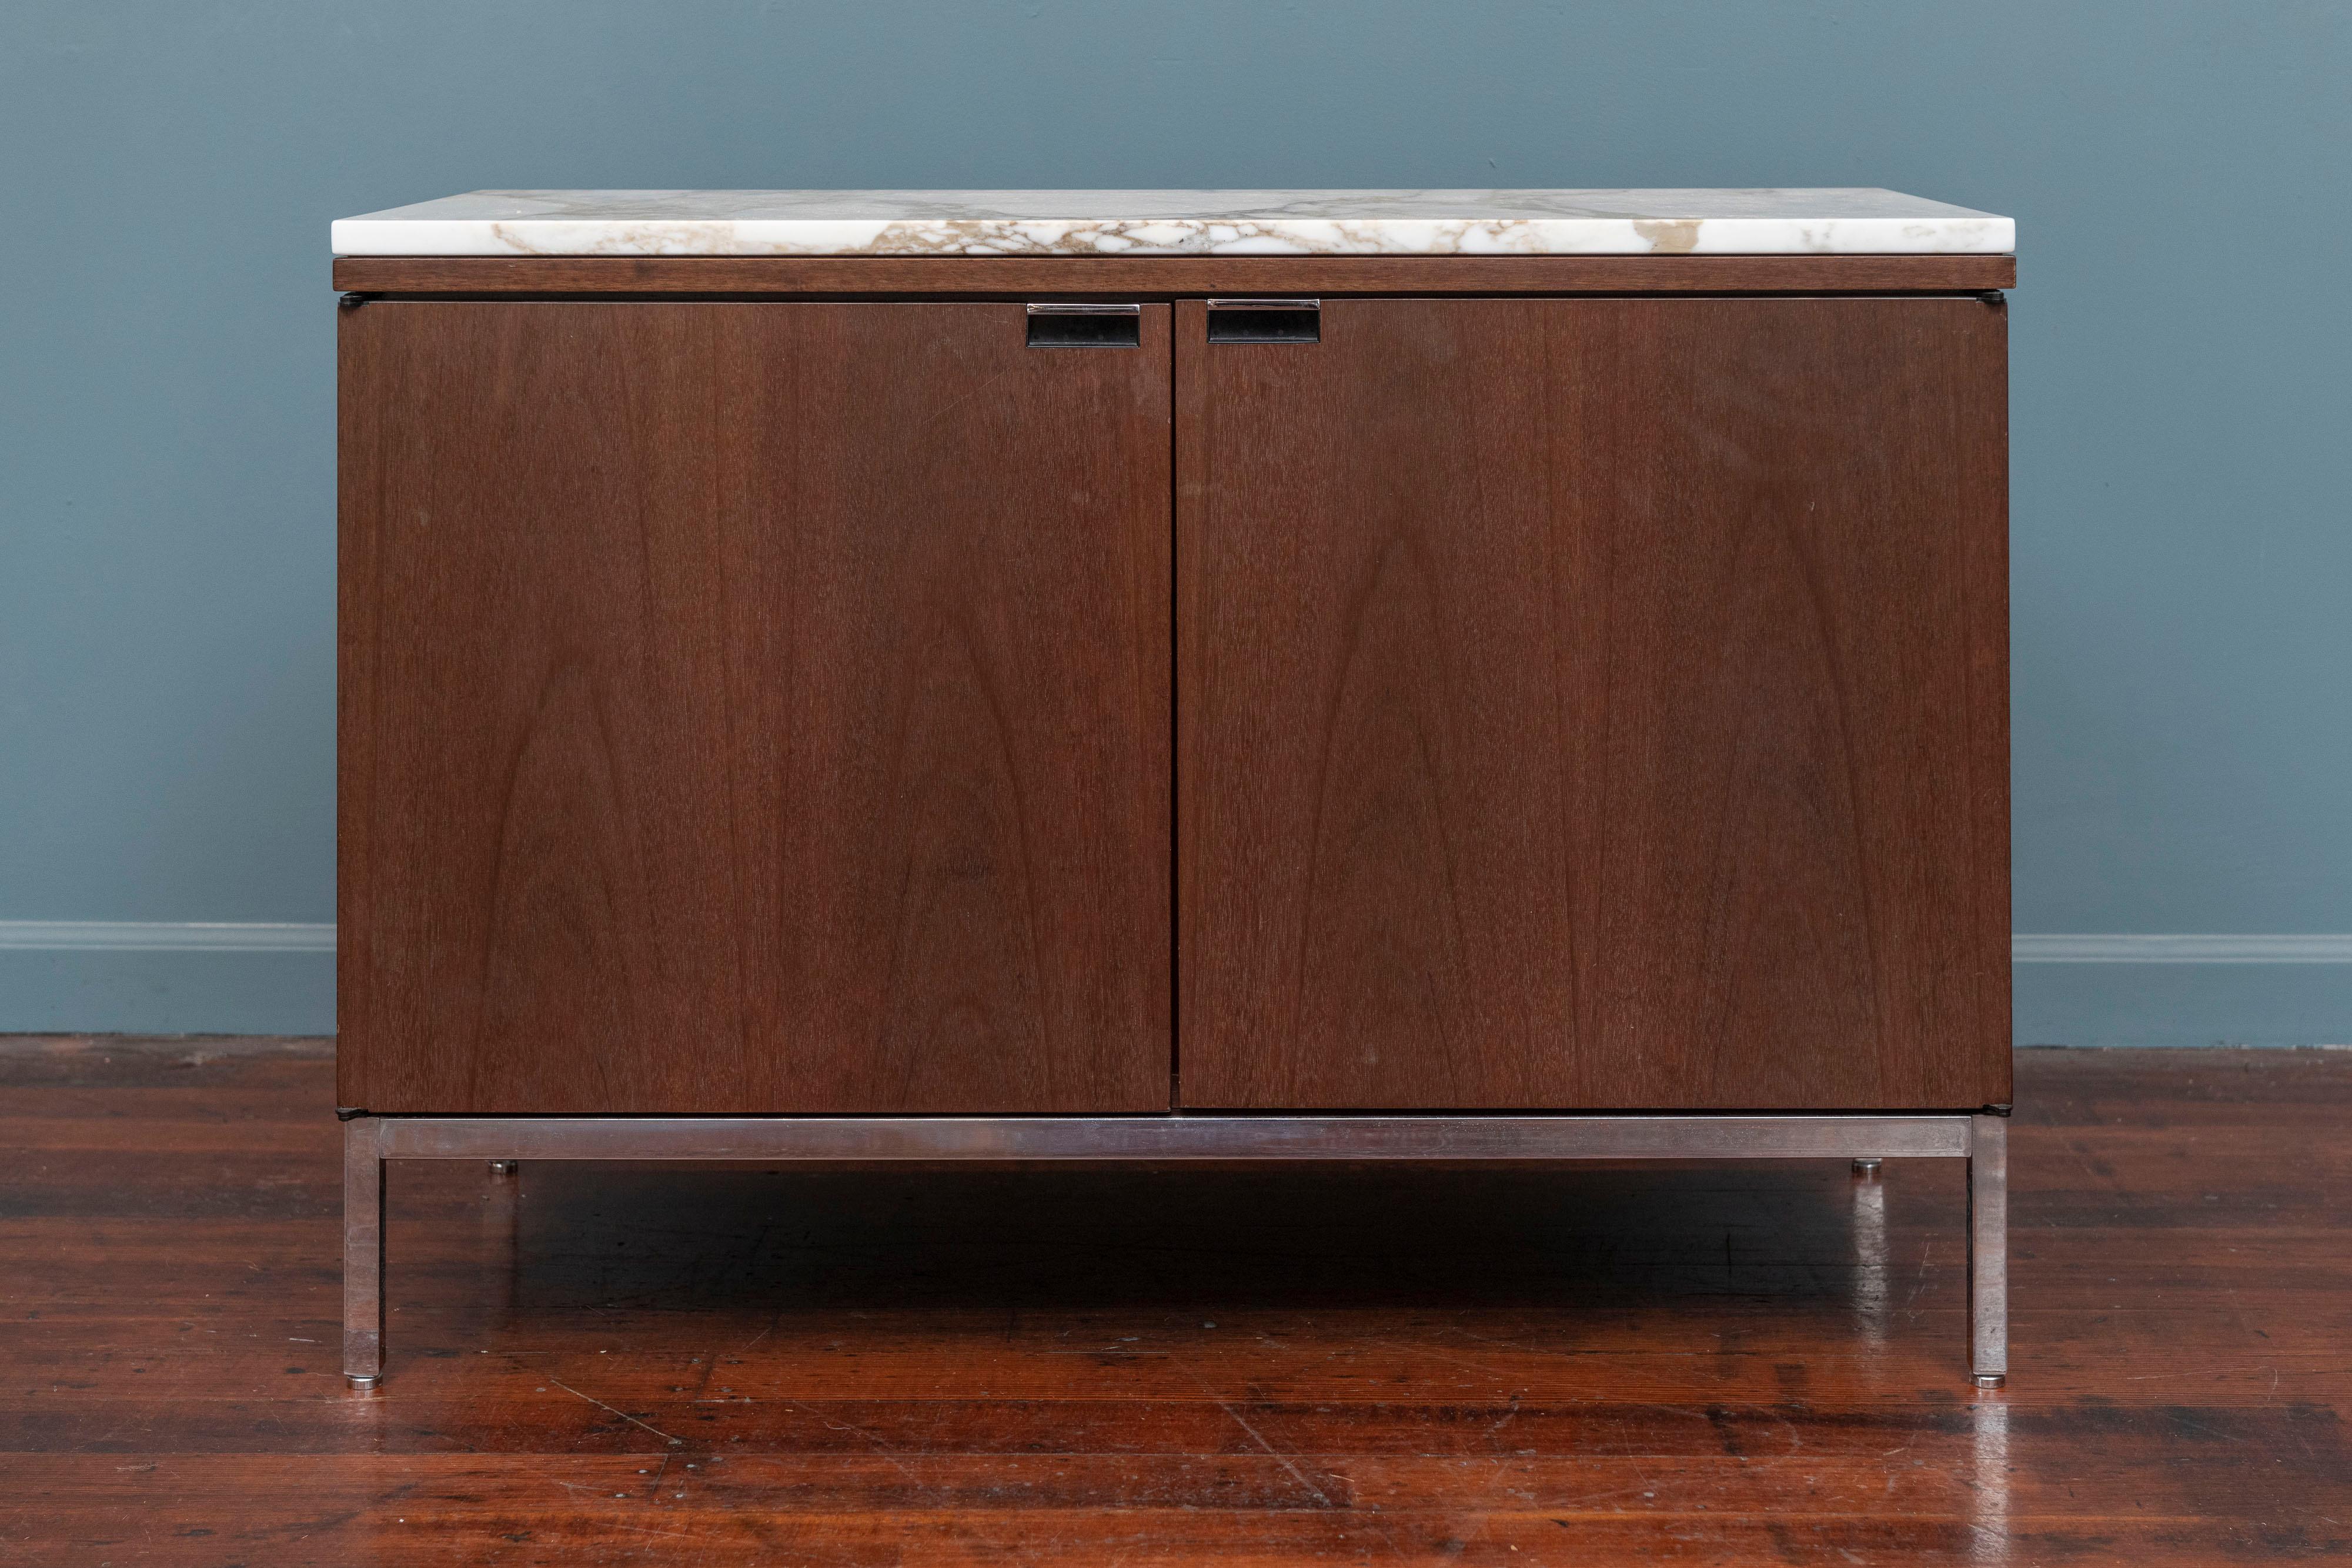 Knoll style marble top walnut two door credenza or cabinet. Having four adjustable shelves and a later added electrical access hole. Supported on a chrome squared frame on adjustable feet.
In very good original condition and ready to install, top